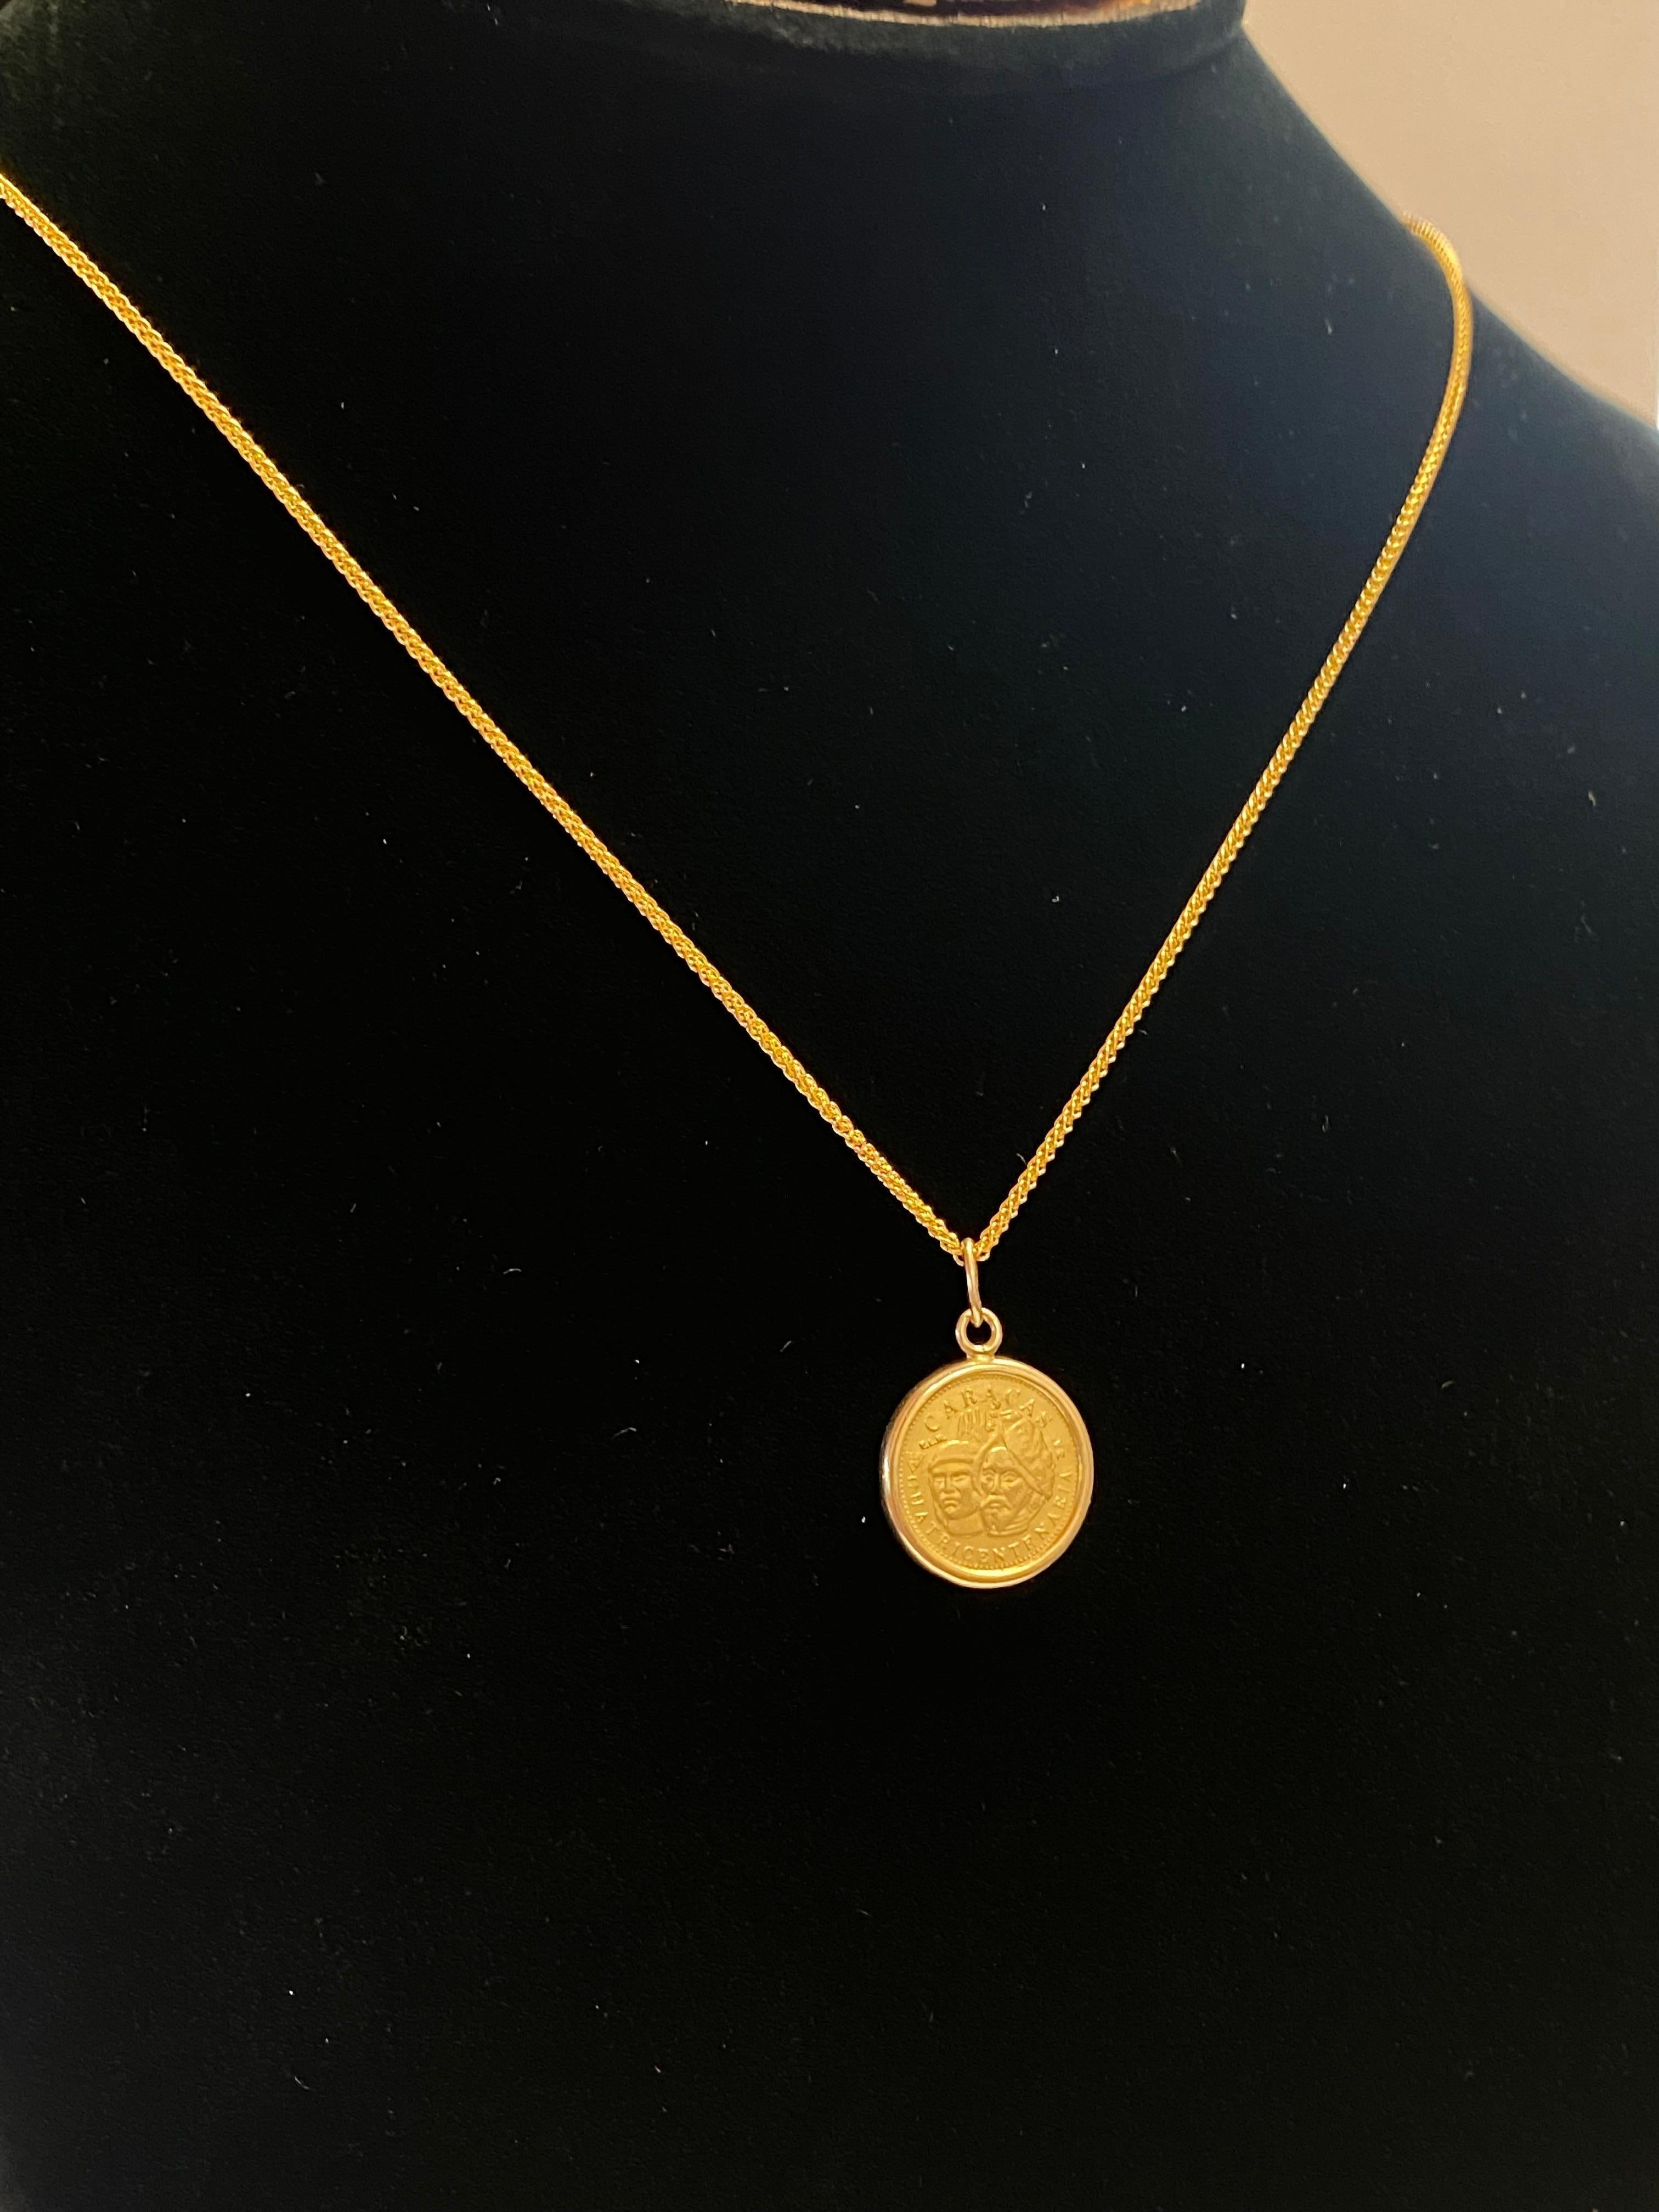 22k gold coin necklace